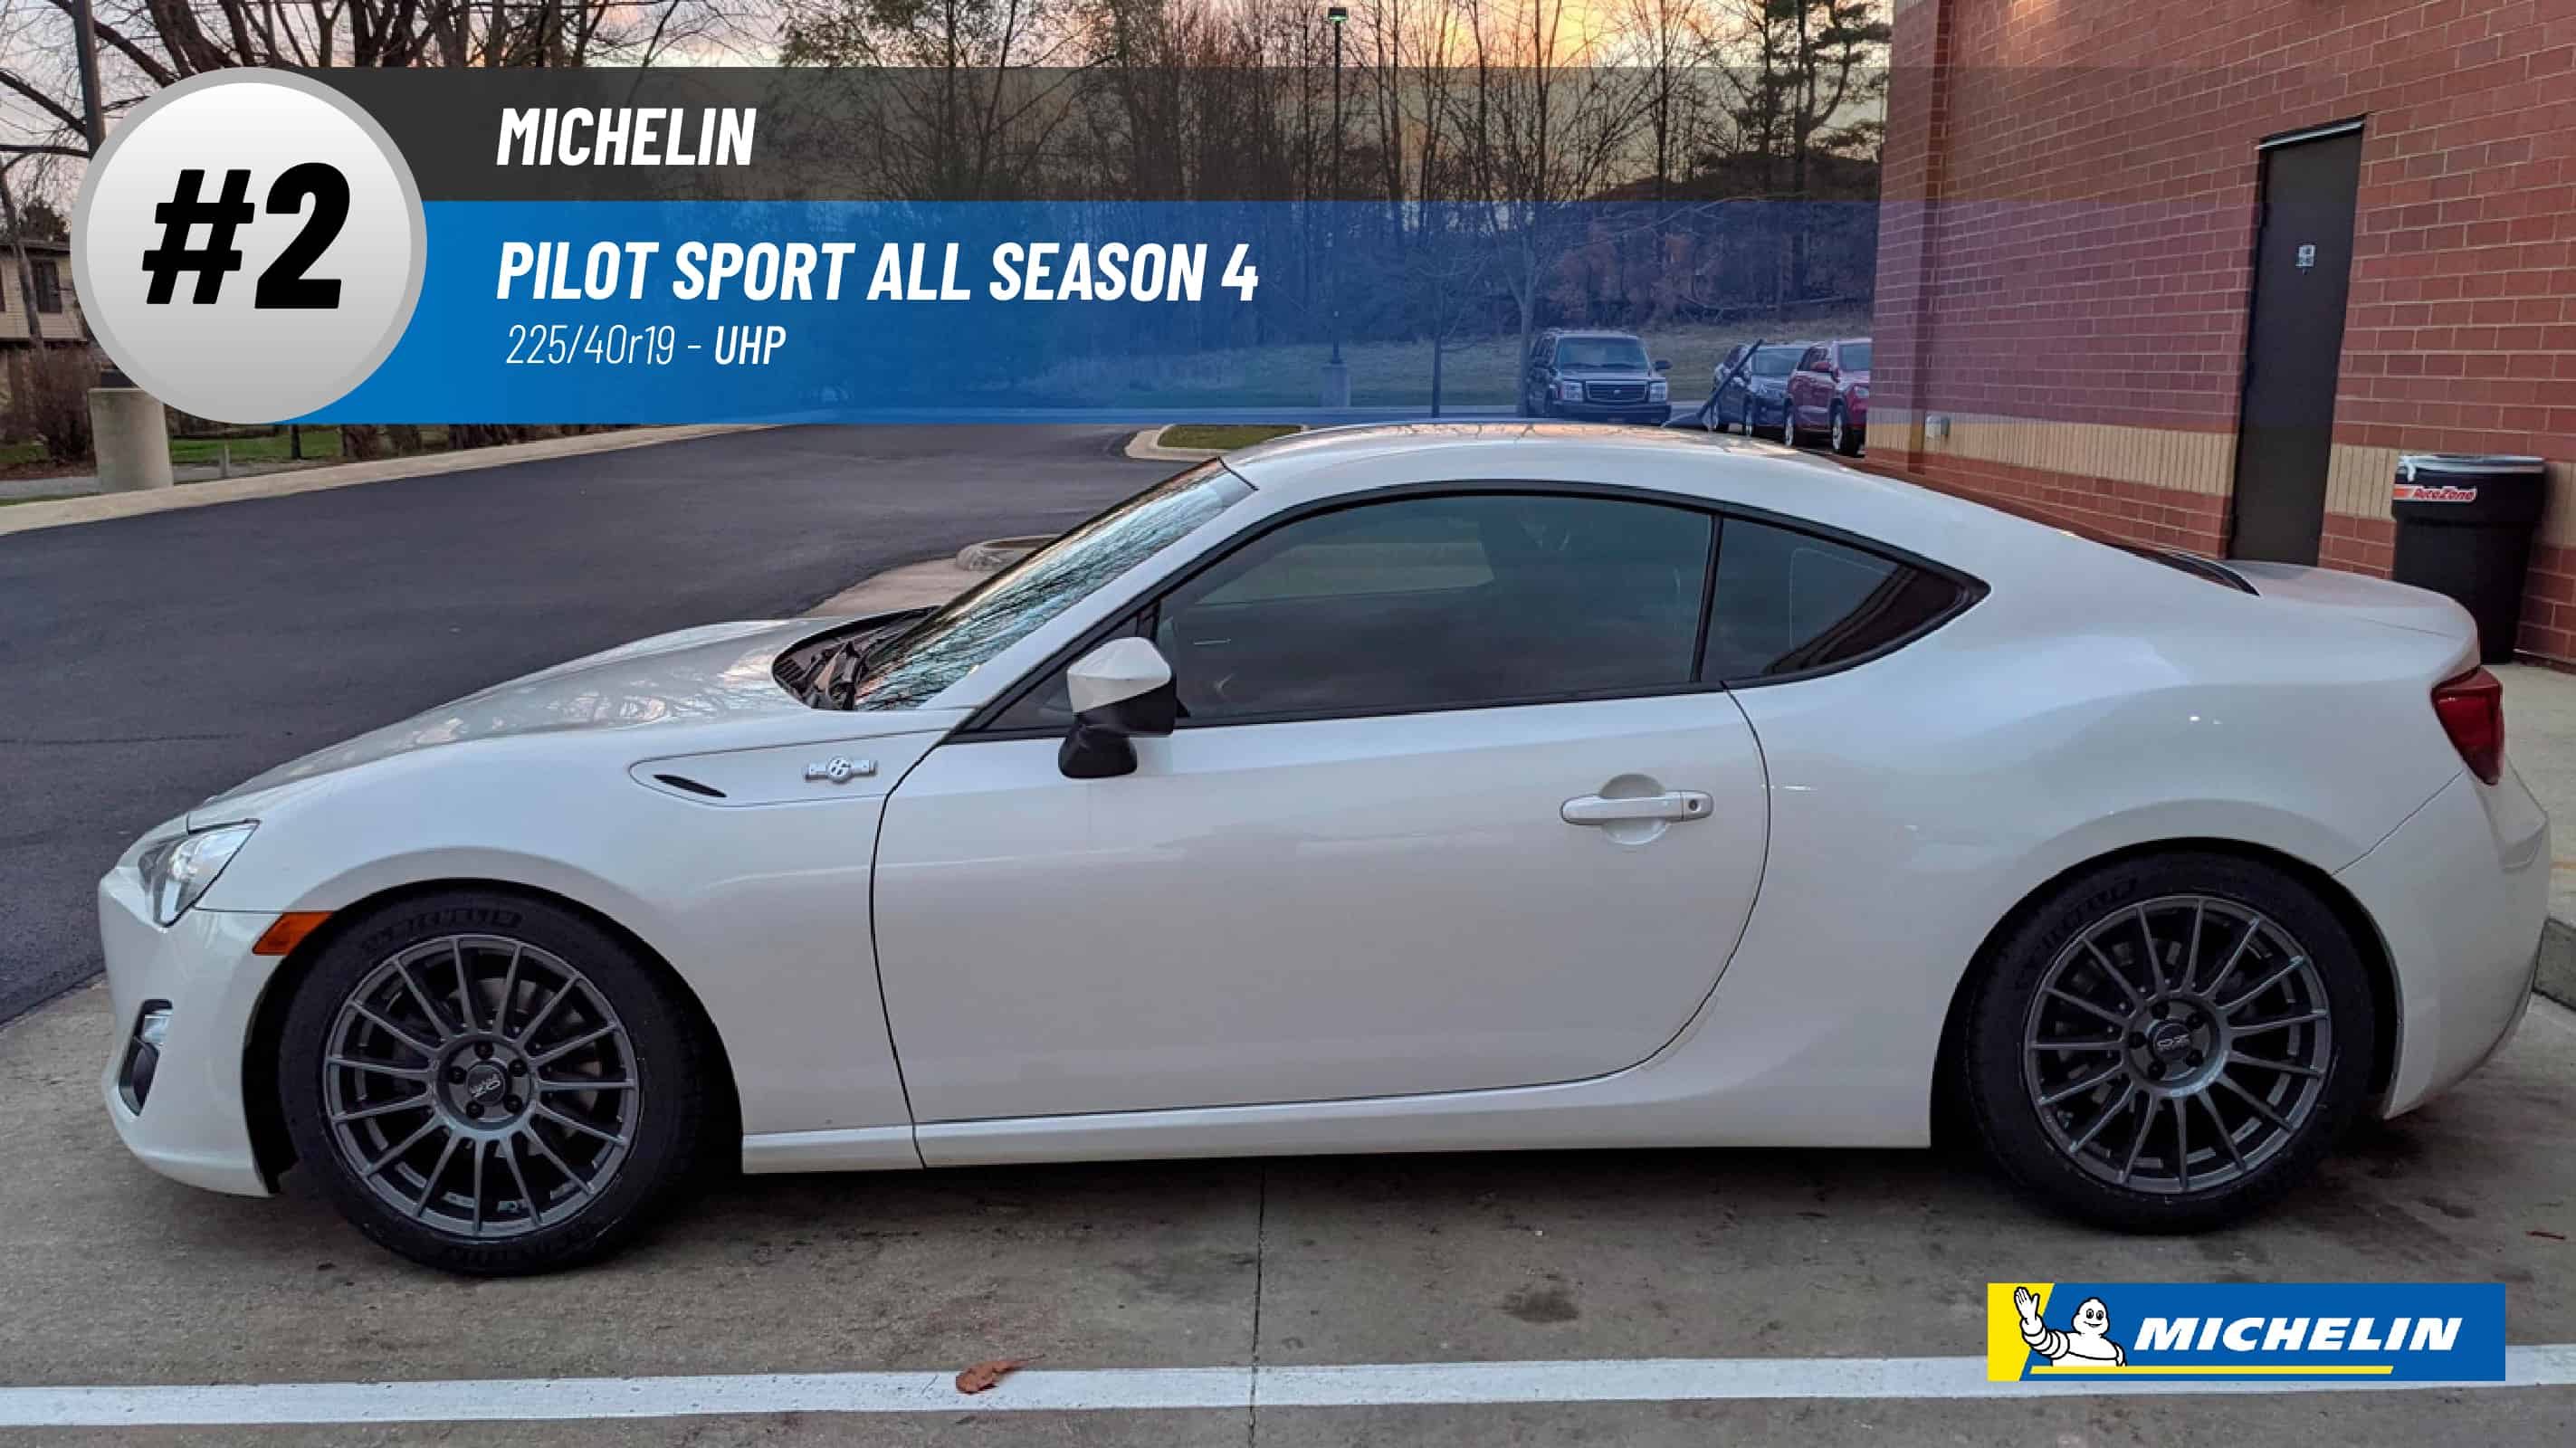 Top #2 UHP Tires: Michelin Pilot Sport All Season 4 – best 225/40r19